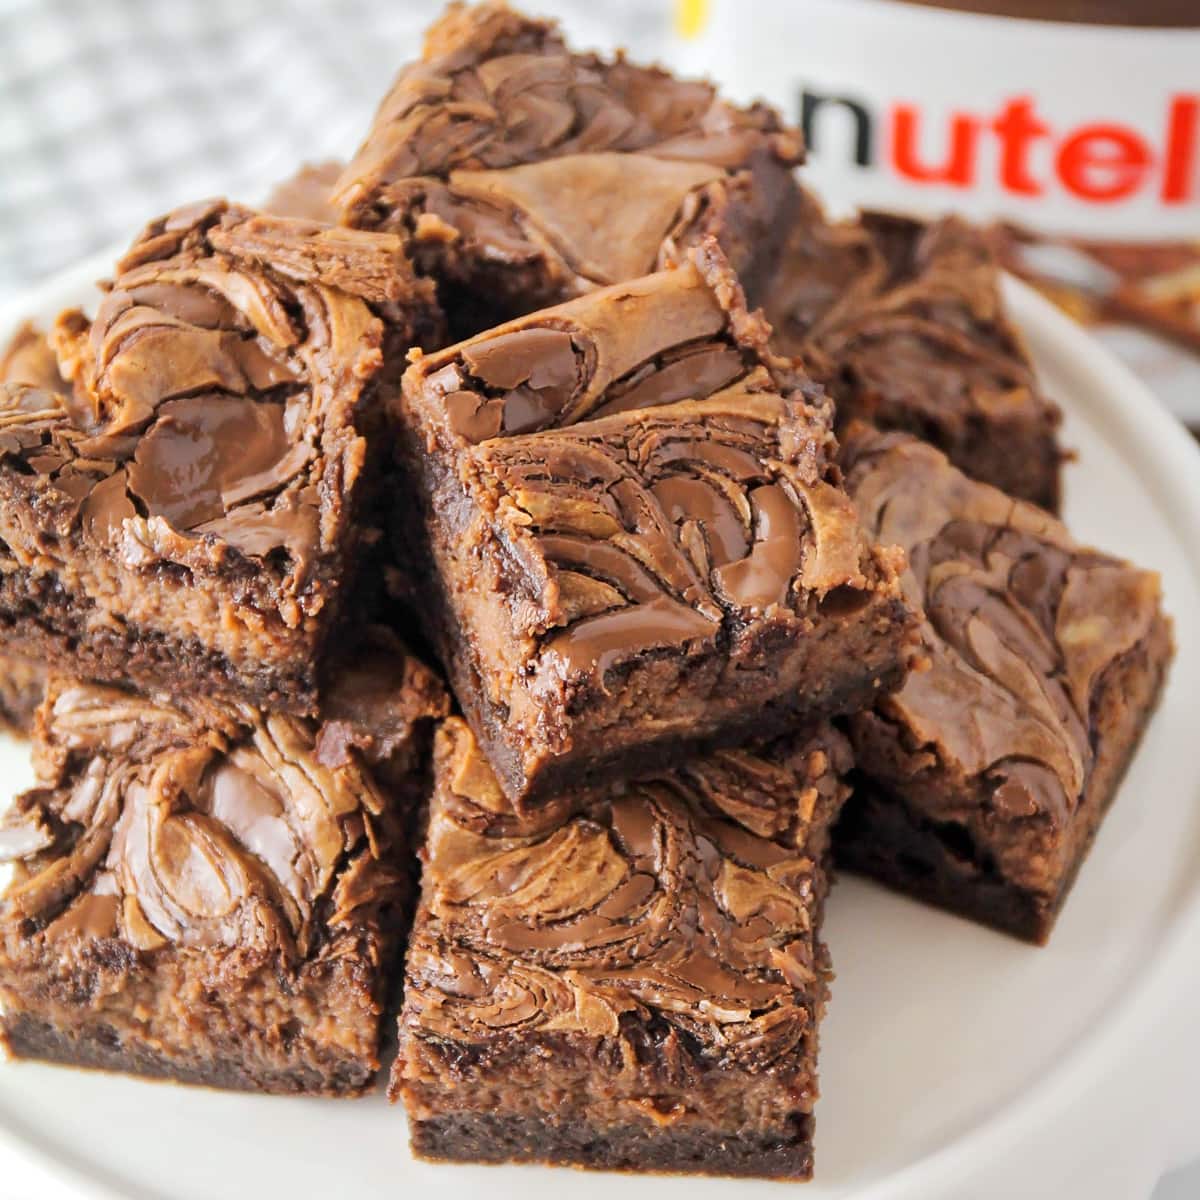 A plate of nutella brownies.